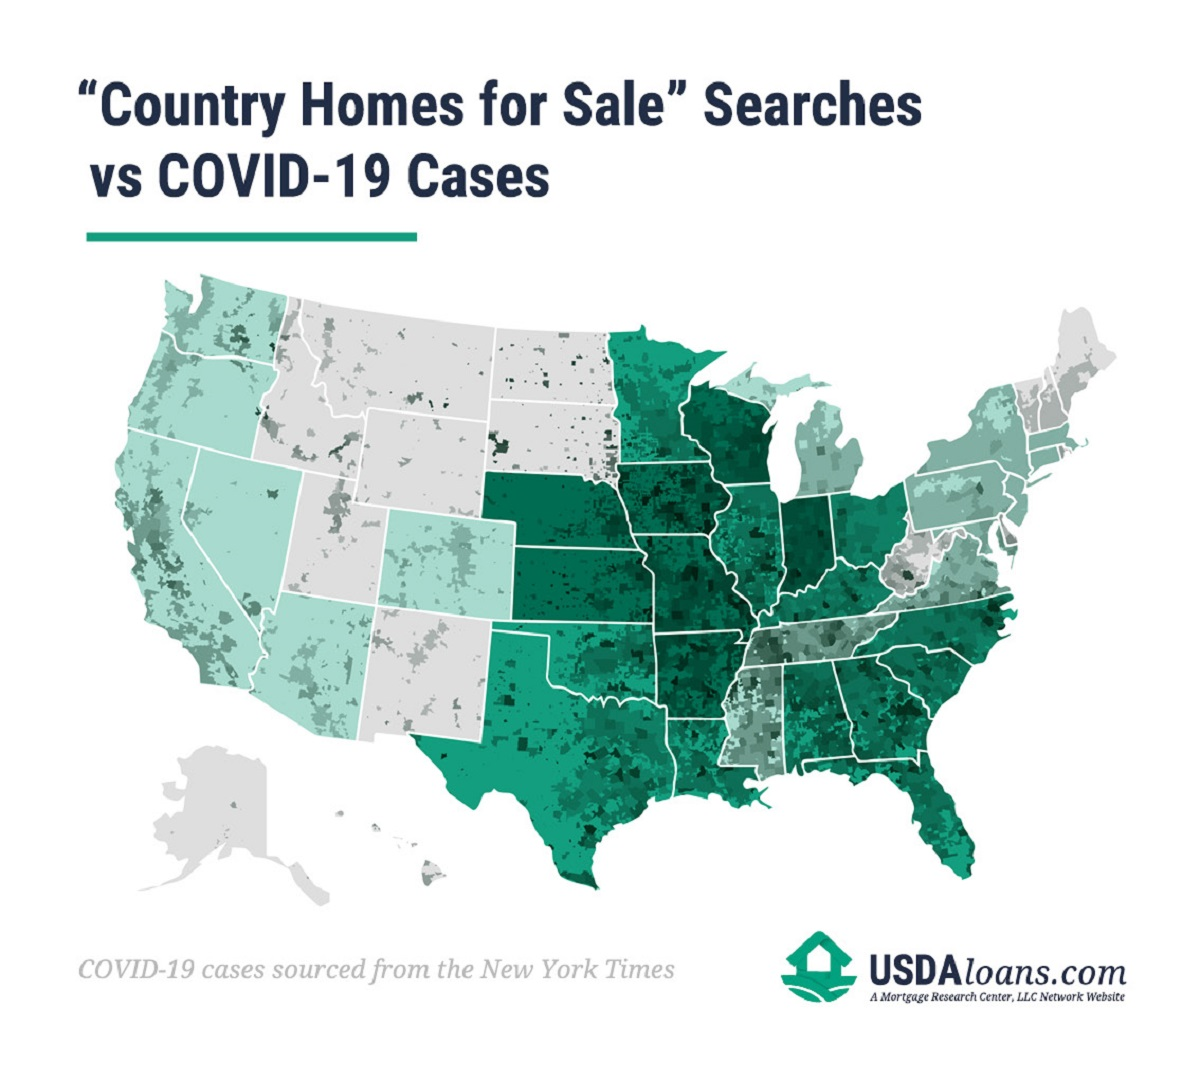 concentration of searches for country homes for sale vs COVID-19 cases graph